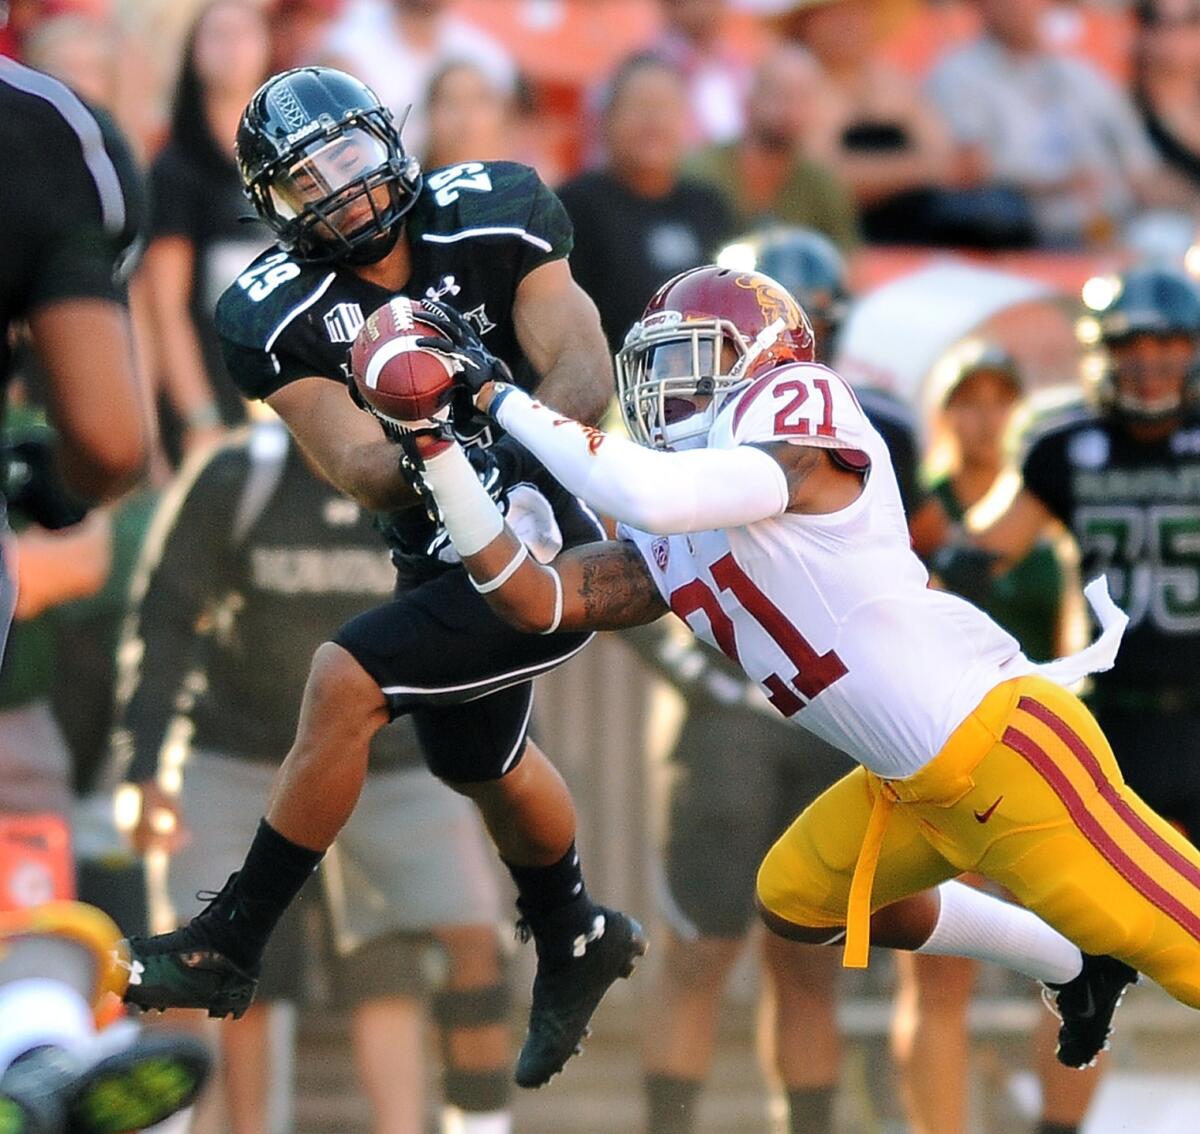 USC safety Su'a Cravens, right, intercepts a pass intended for Hawaii receiver Scott Harding during the Trojans' season-opening win. Cravens says USC is prepared for a tough test against Arizona State.